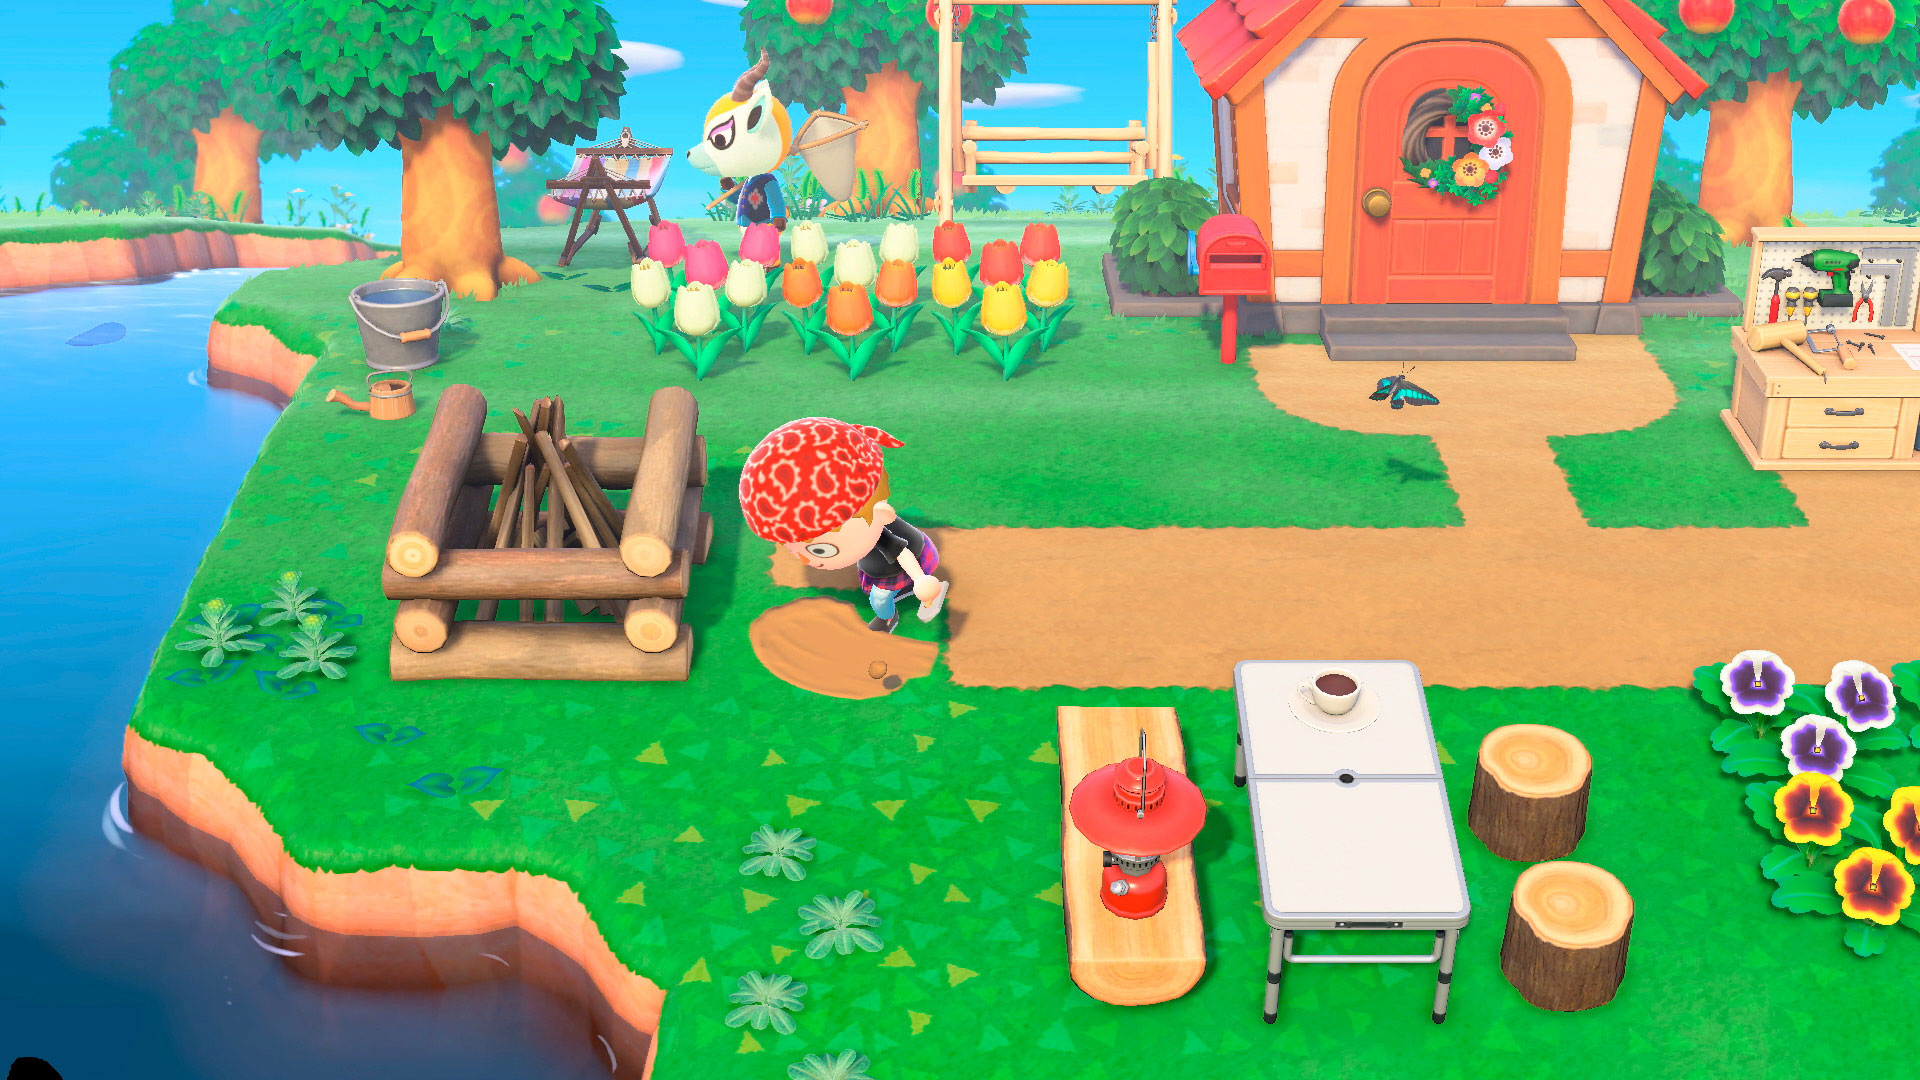 Animal Crossing: New Horizons Wallpapers - HD Desktop & Mobile Backgrounds! - Pro Game Guides